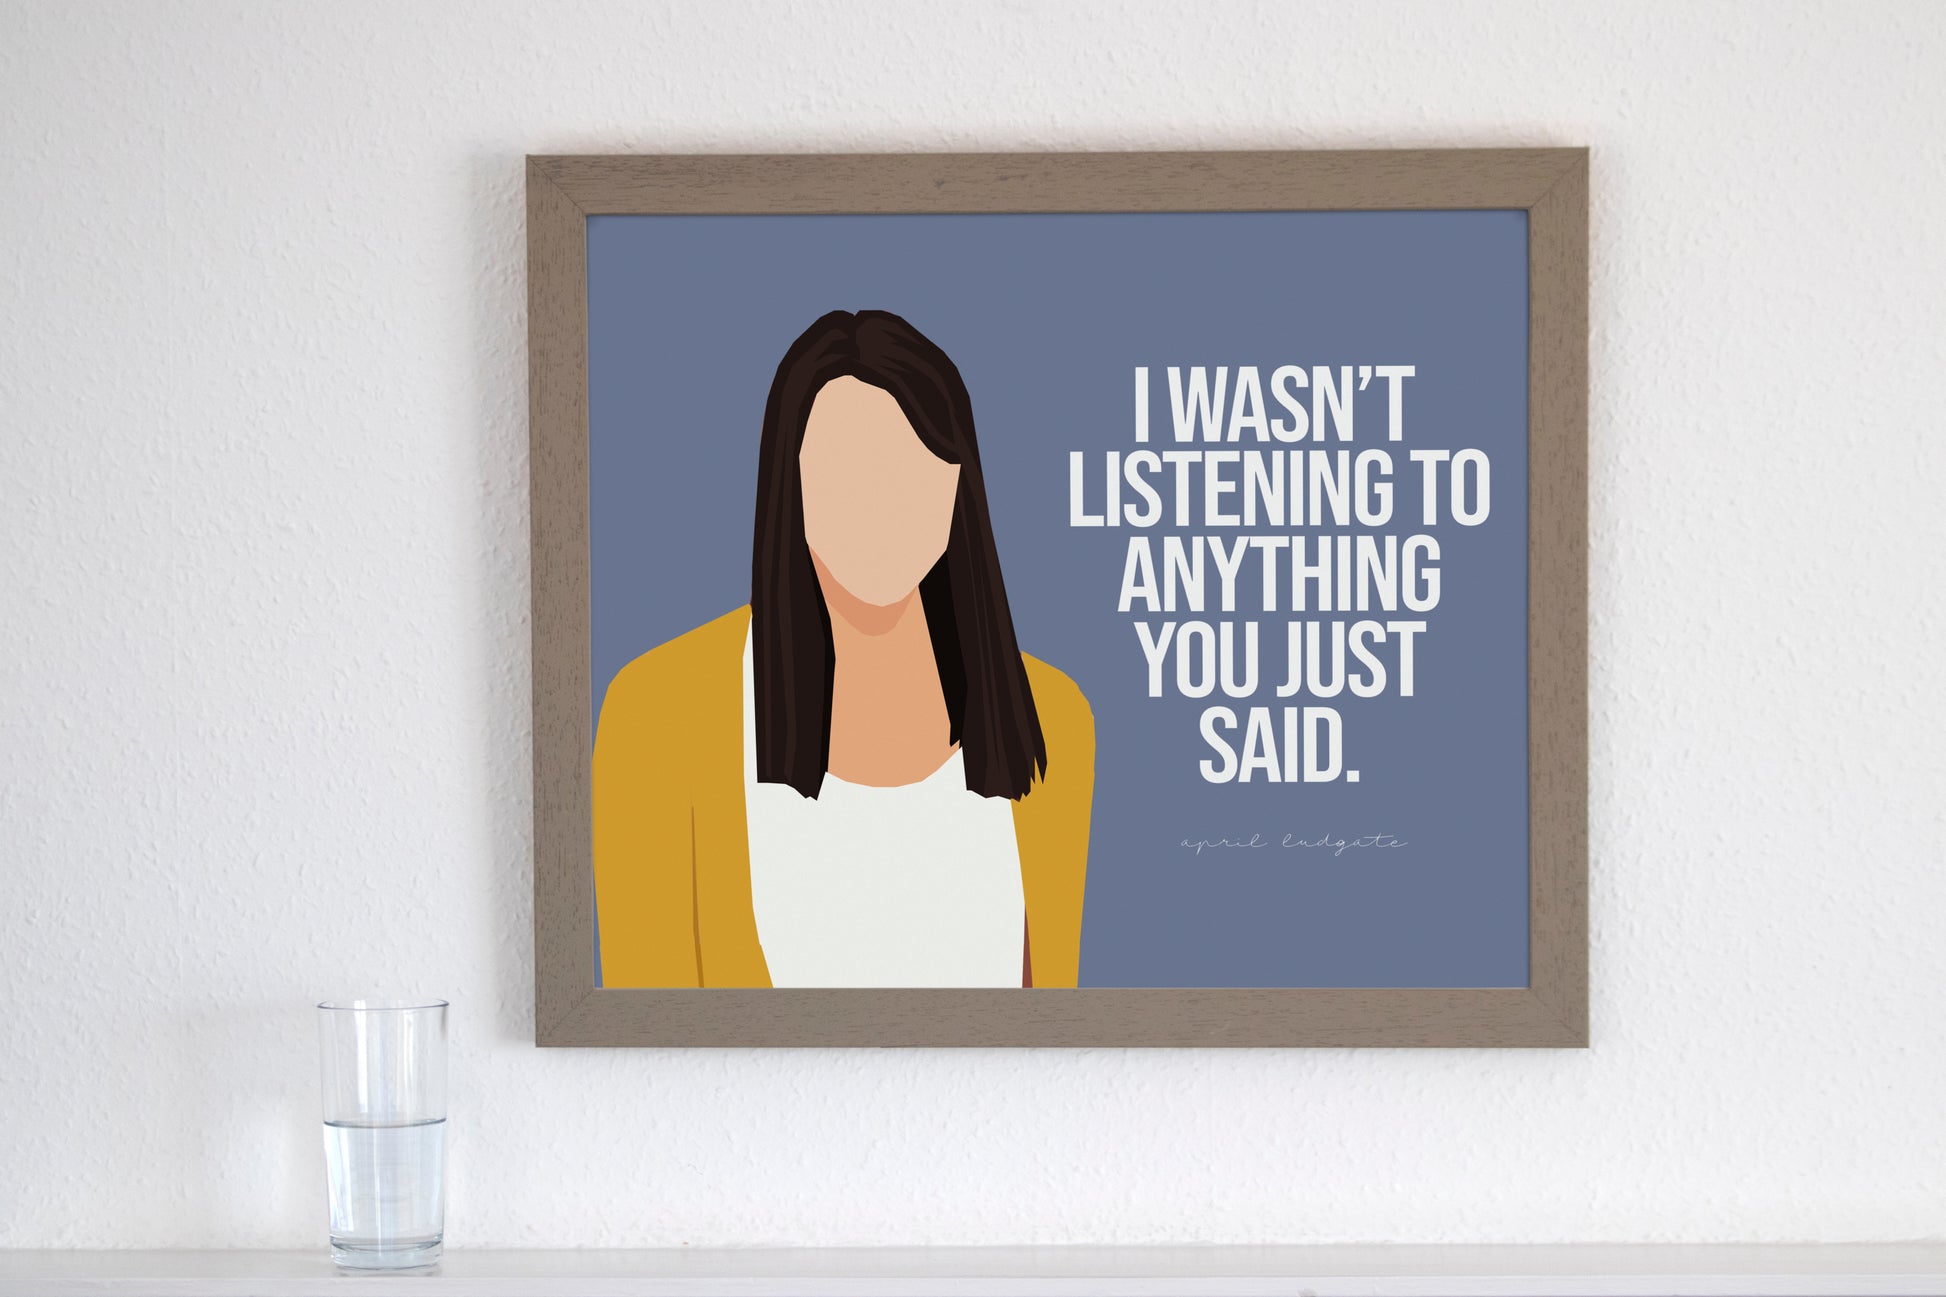 I wasn't listening to anything you just said. - April Ludgate from Parks and Recreation fan gift poster